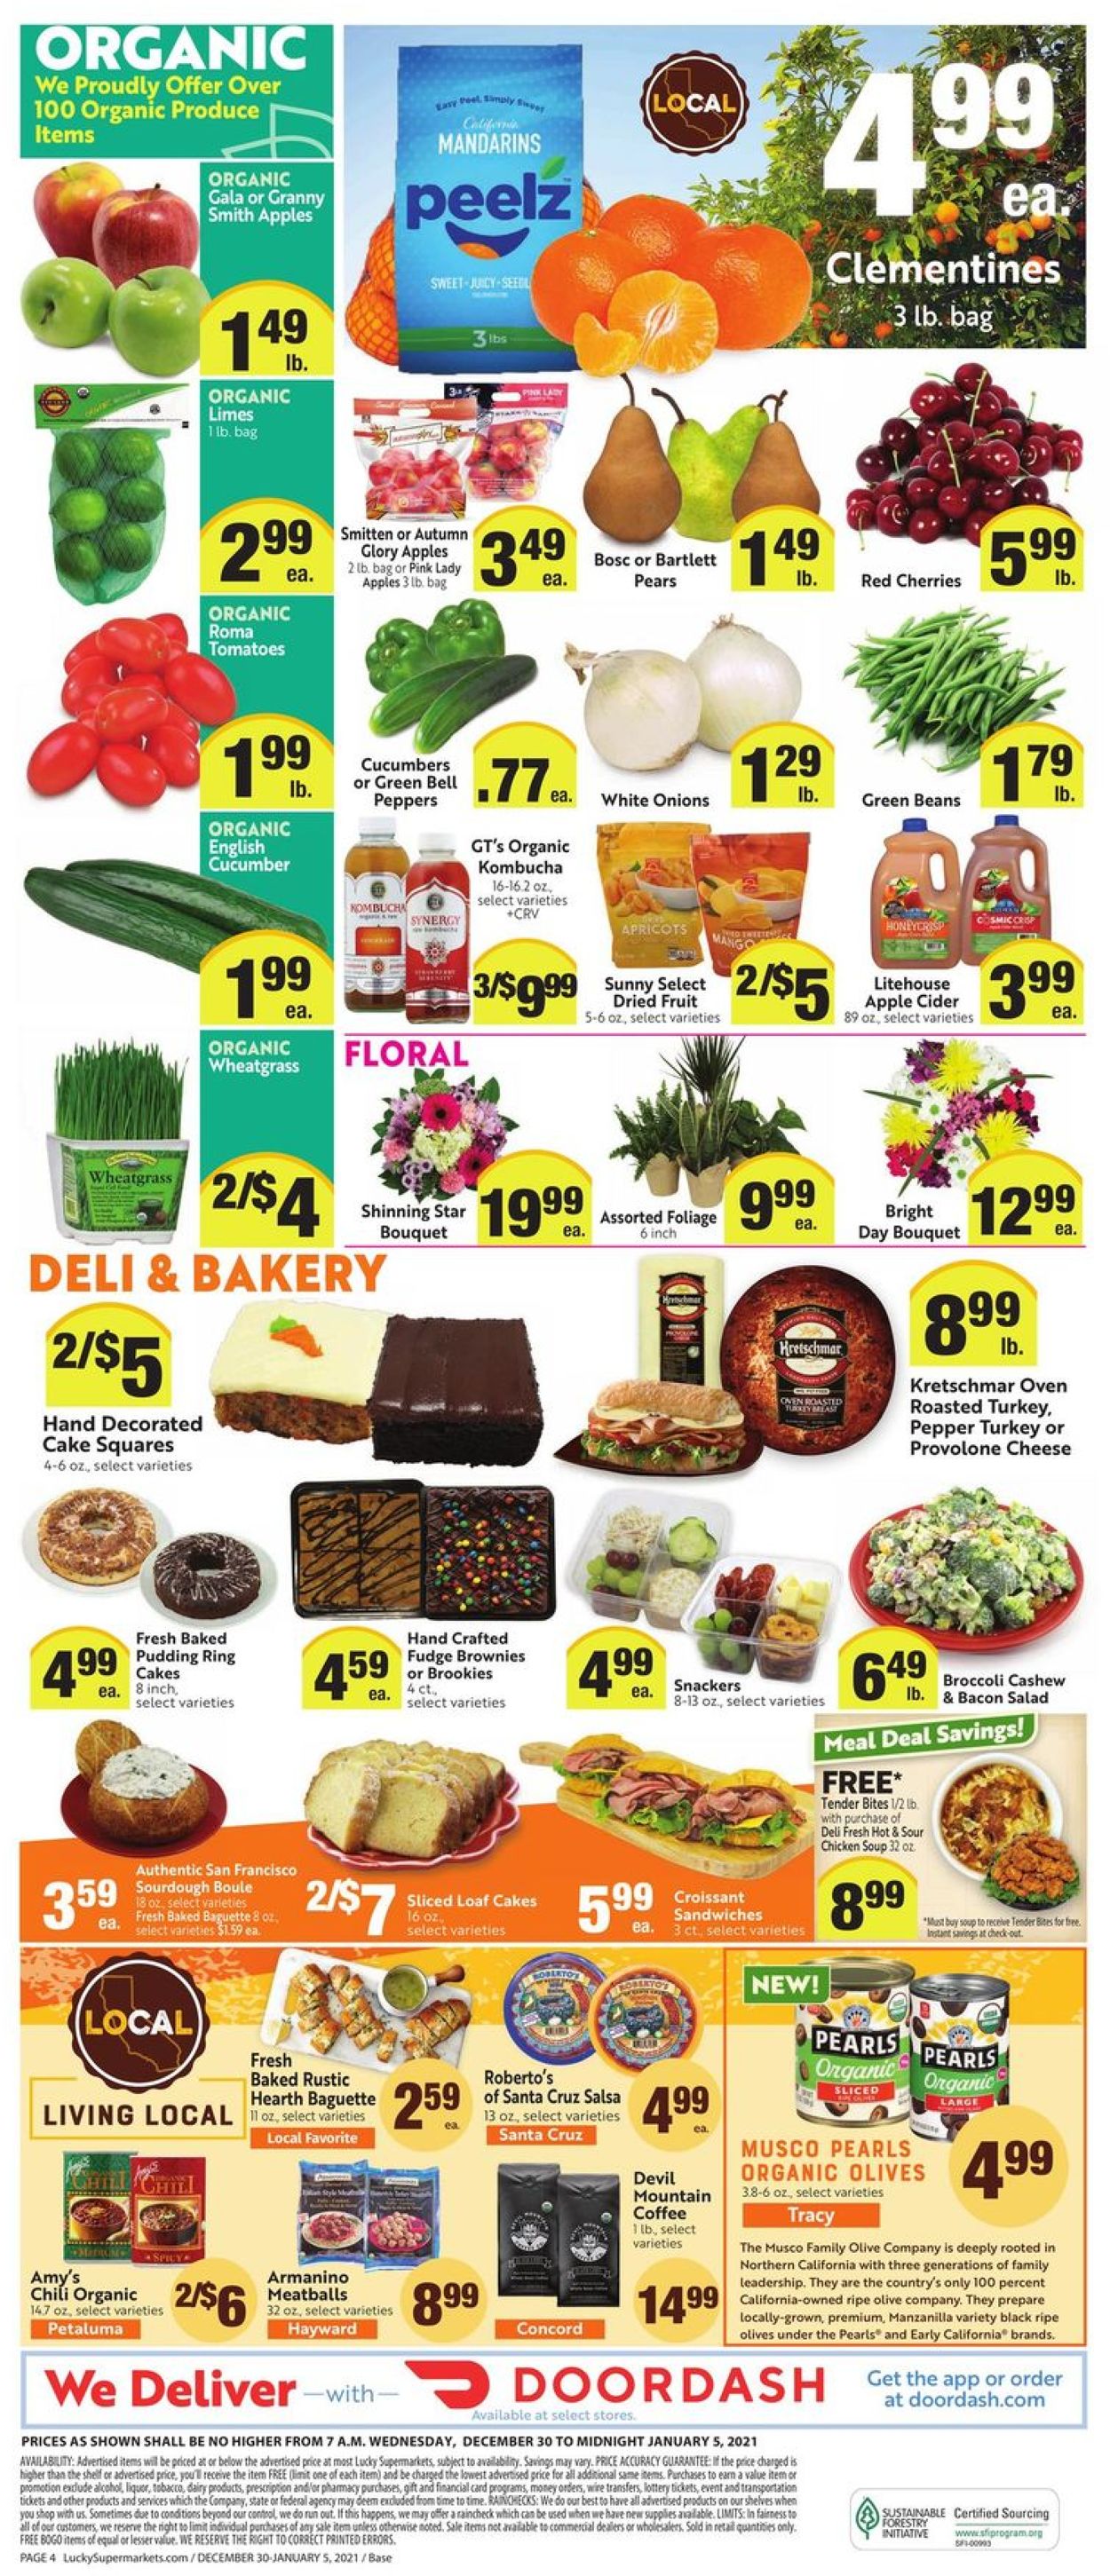 Lucky Supermarkets Ad from 12/30/2020